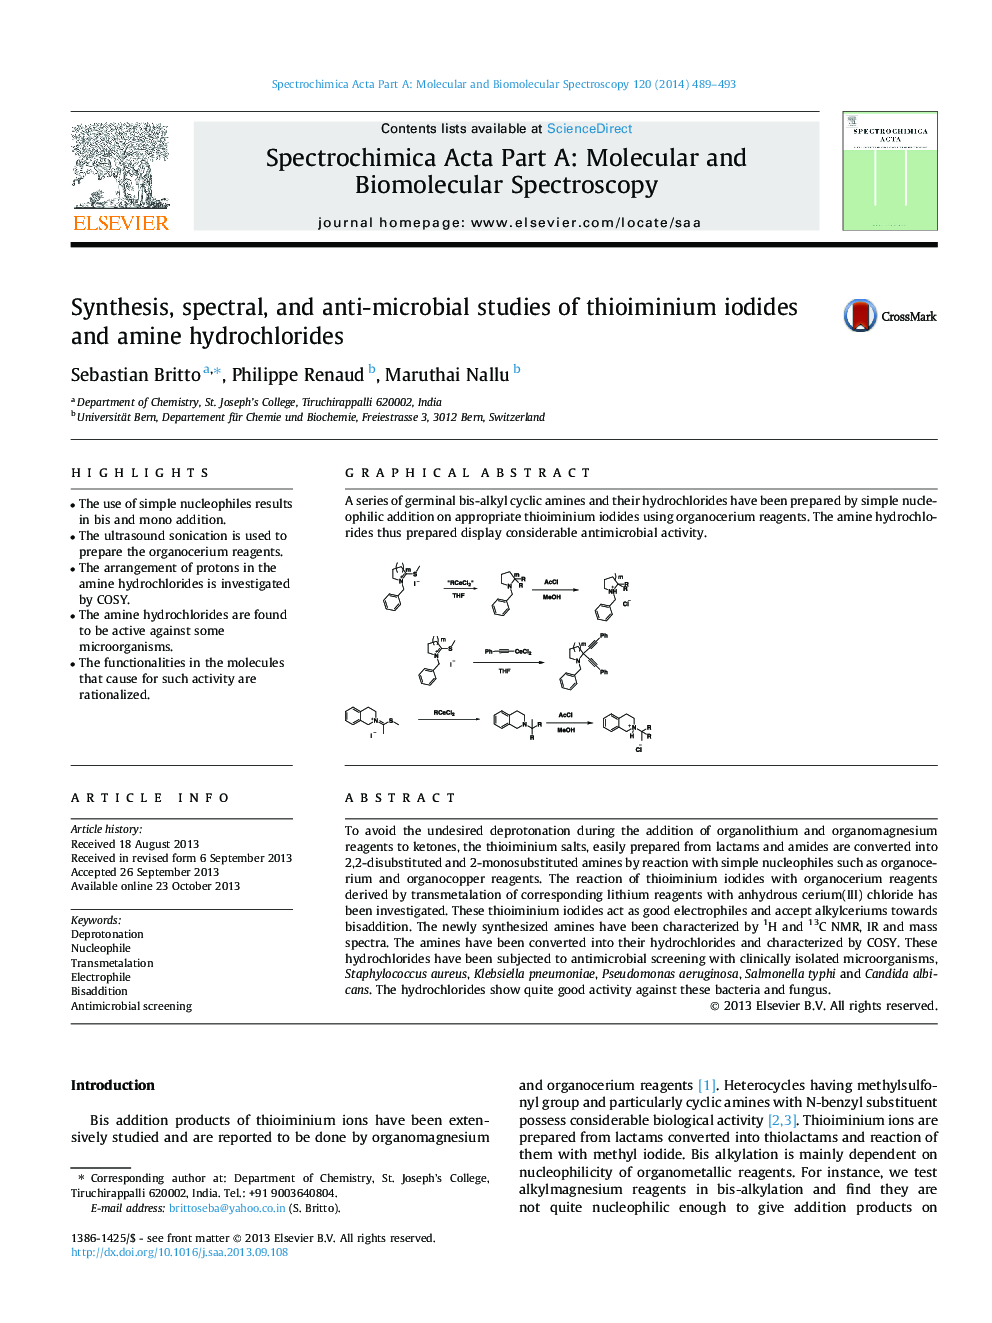 Synthesis, spectral, and anti-microbial studies of thioiminium iodides and amine hydrochlorides